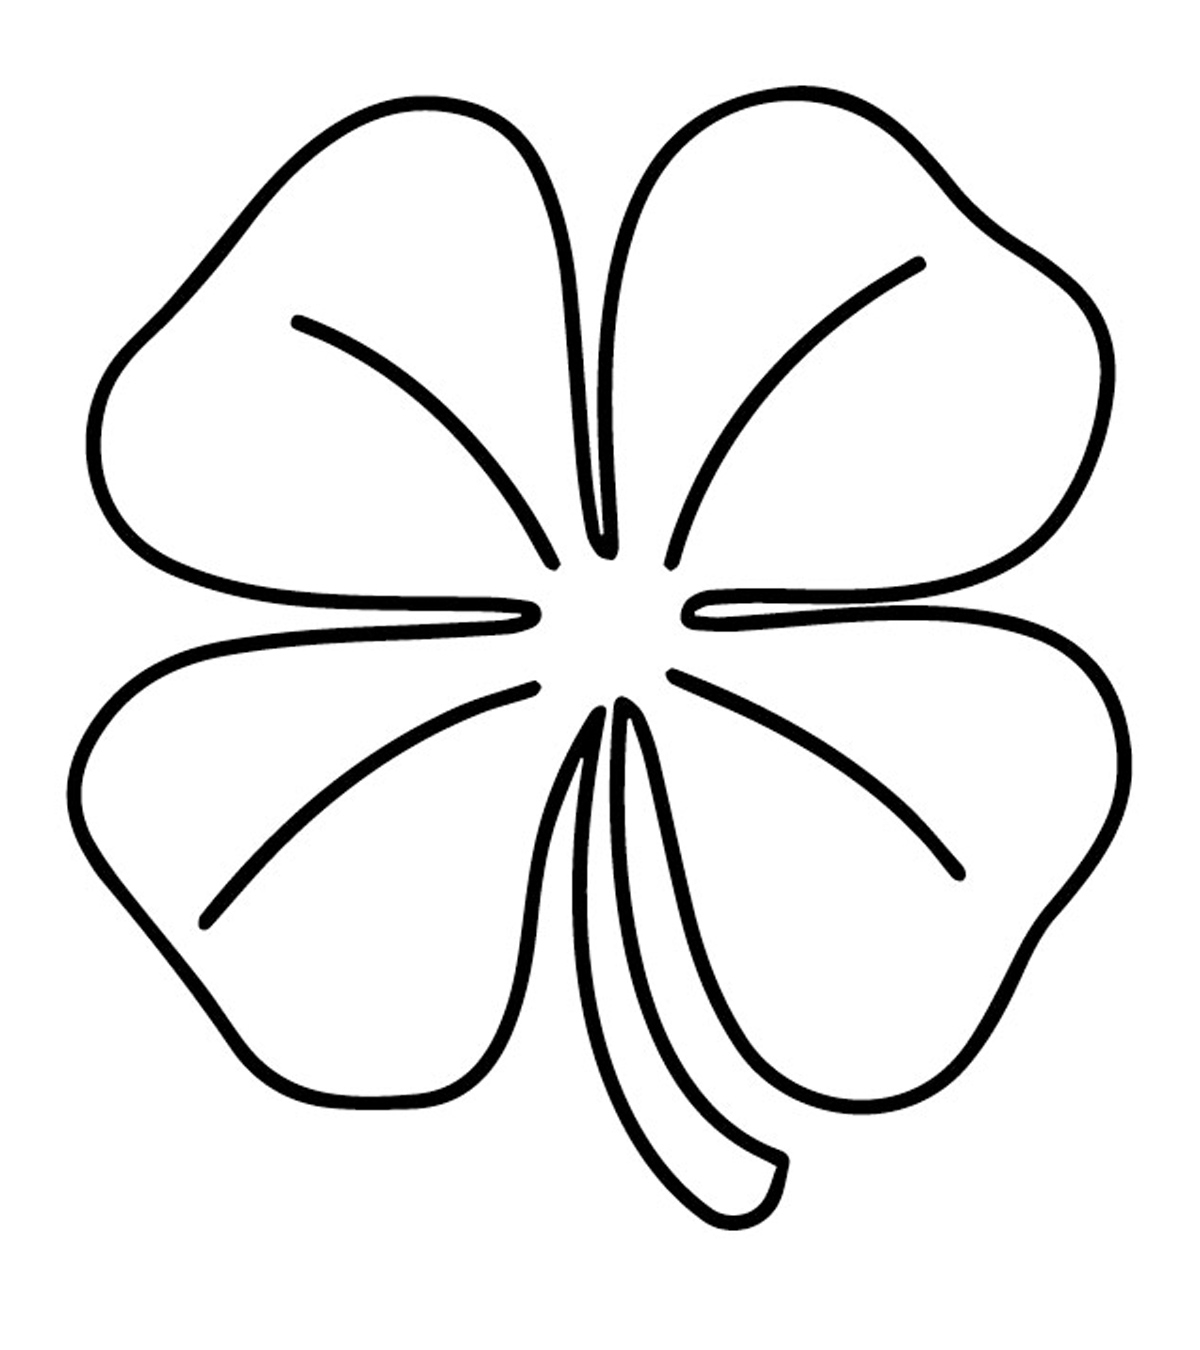 Hard Hat Coloring Page Top 20 Free Printable Four Leaf Clover Coloring Pages Online